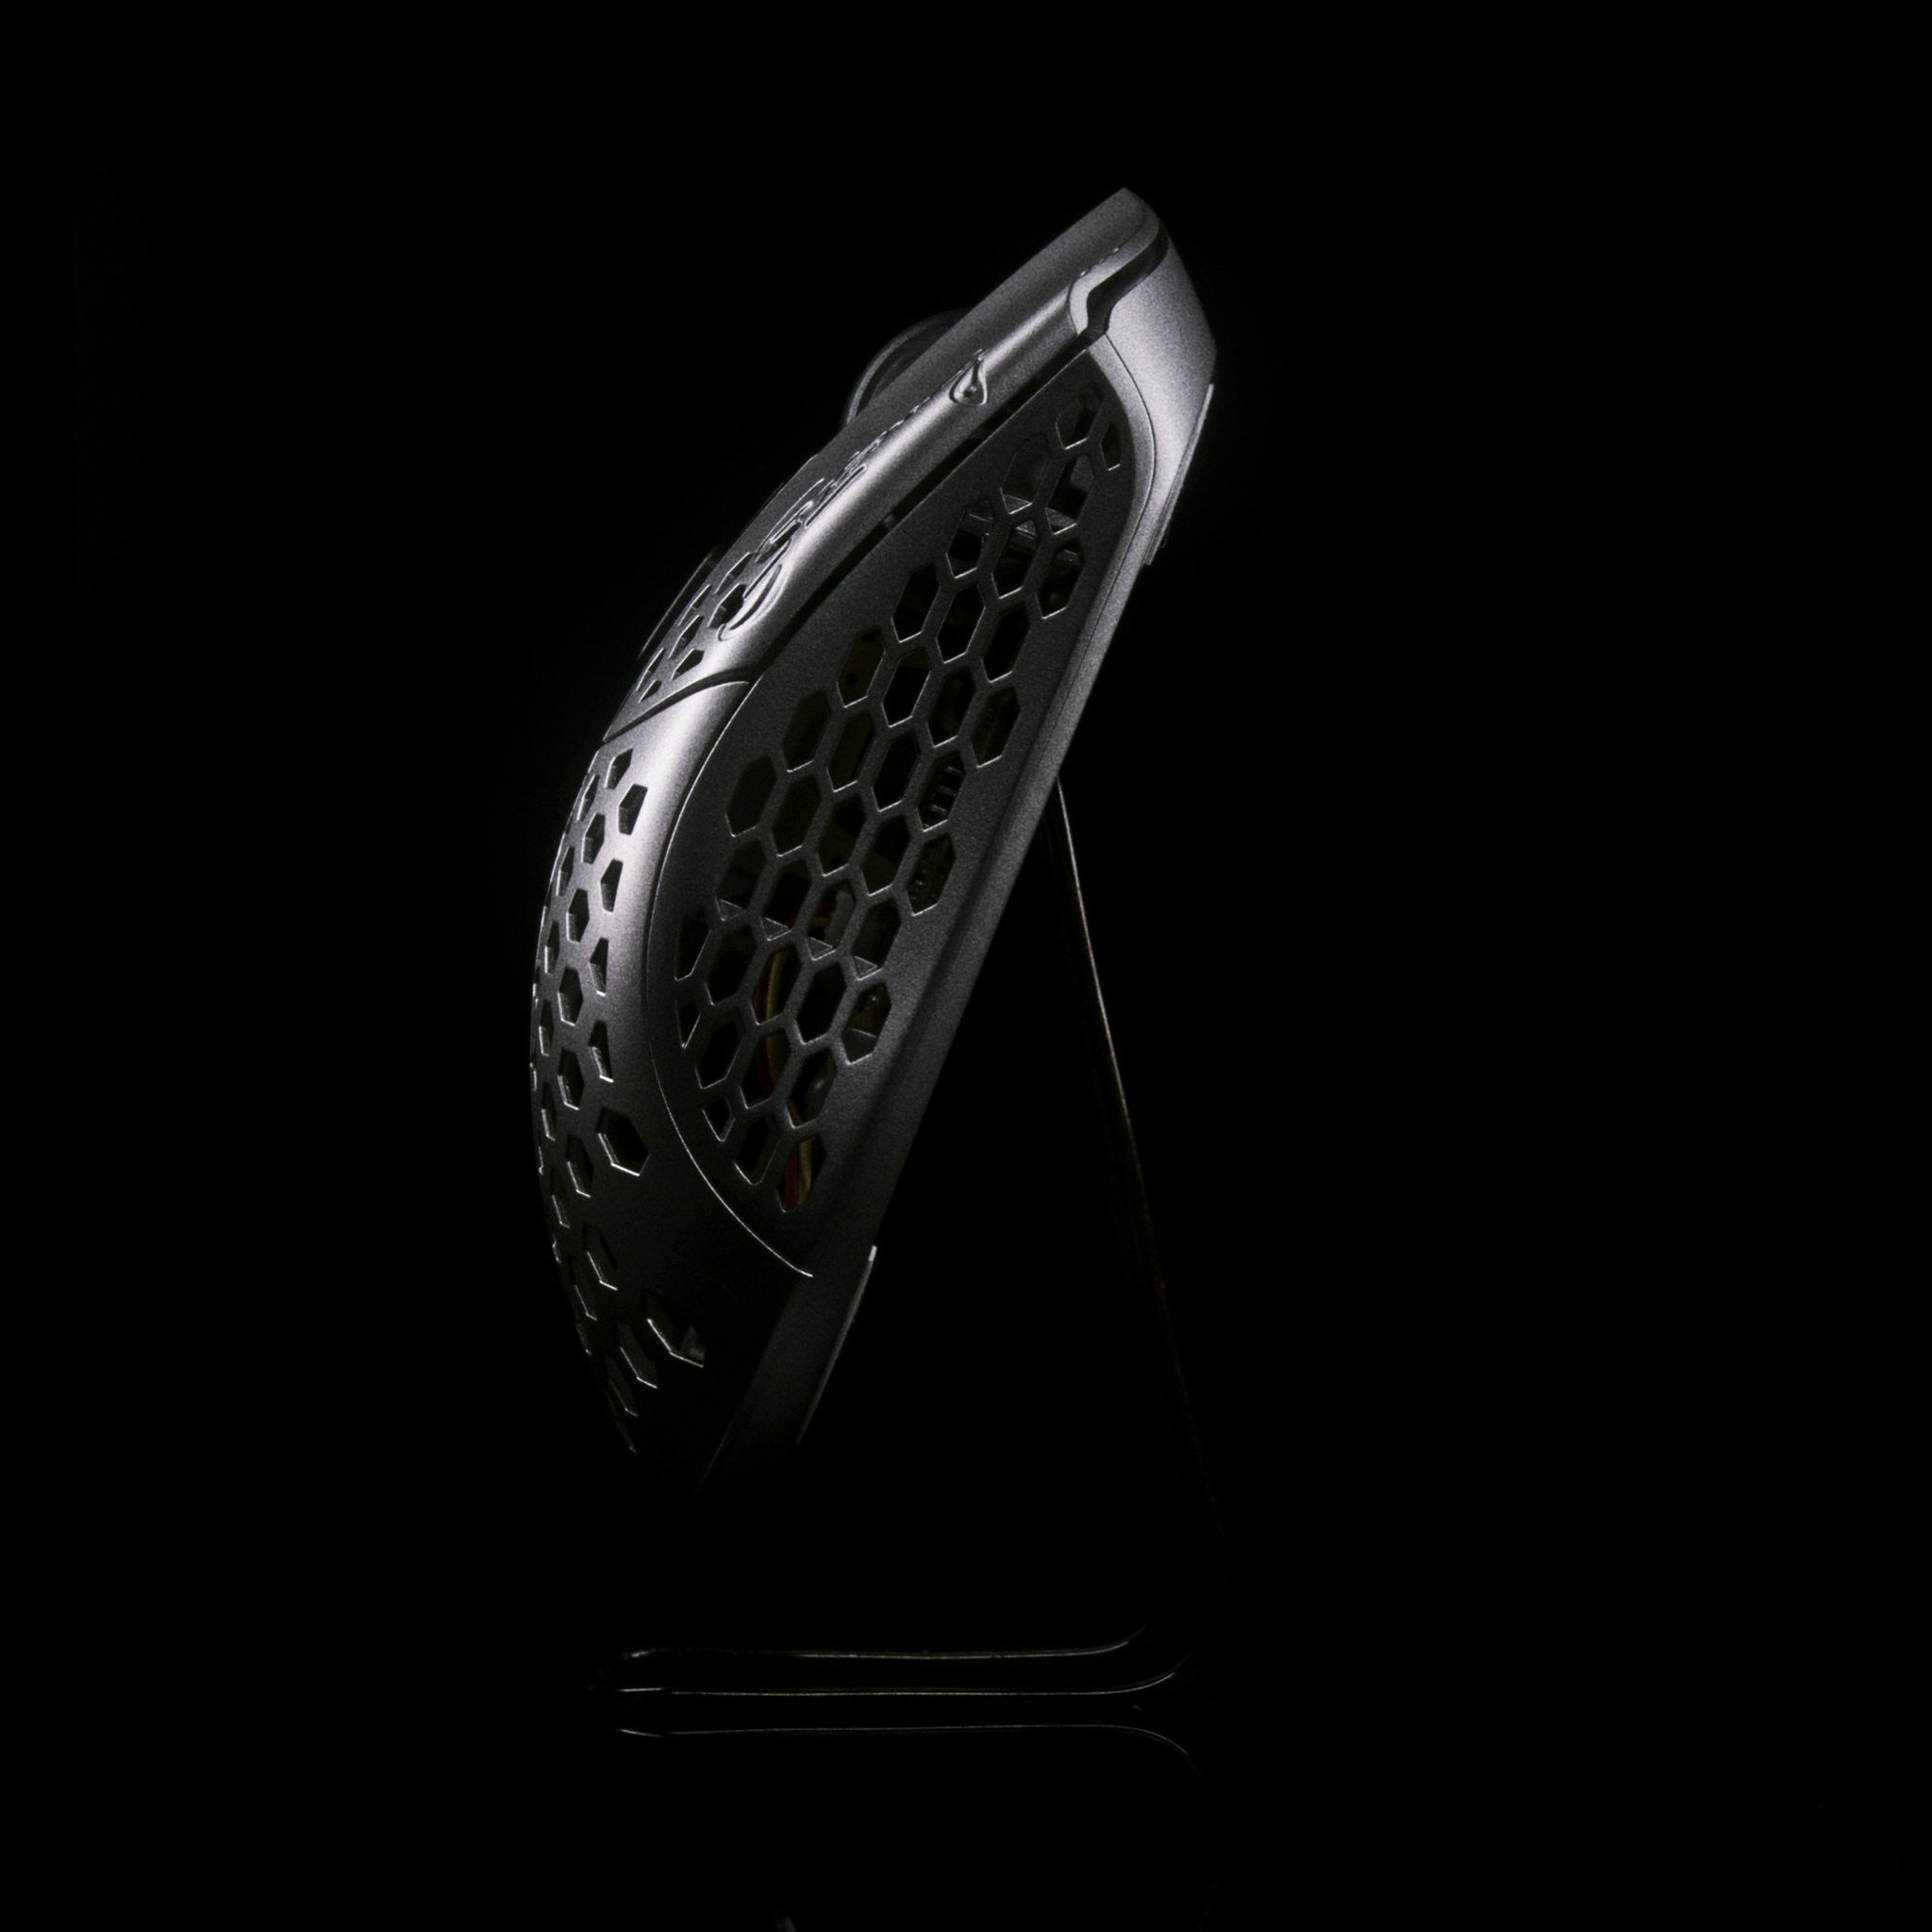 PC/タブレット PC周辺機器 @finalmouse's video Tweet